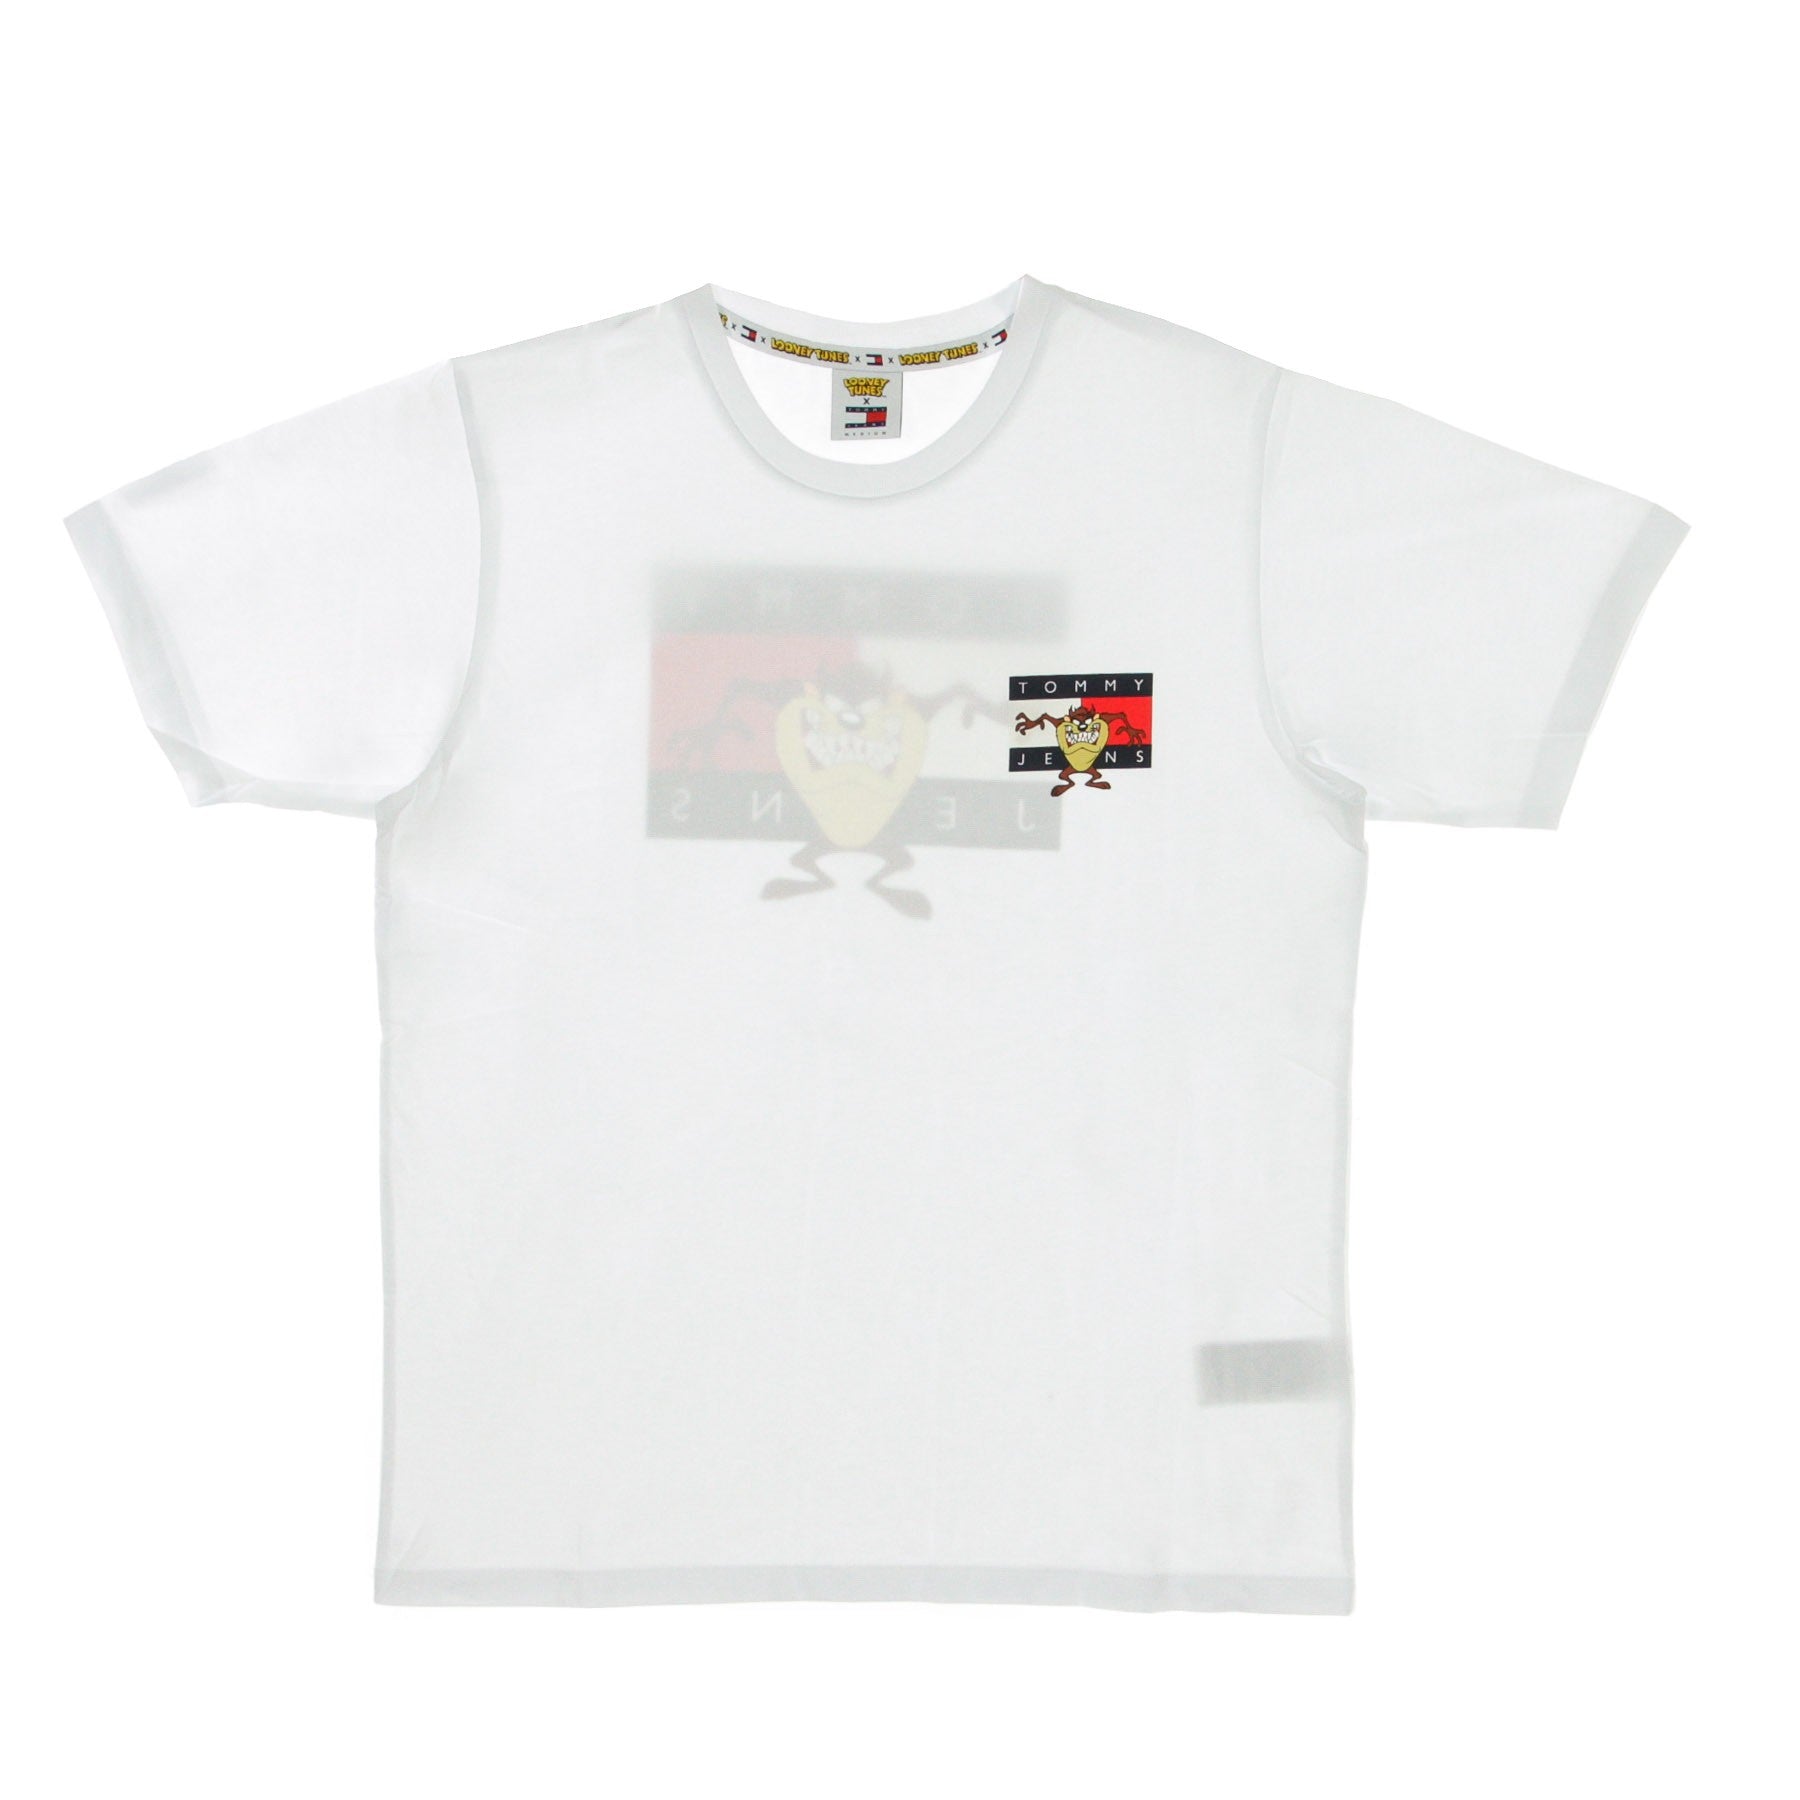 Tommy Tee X Looney Tunes White Women's T-Shirt